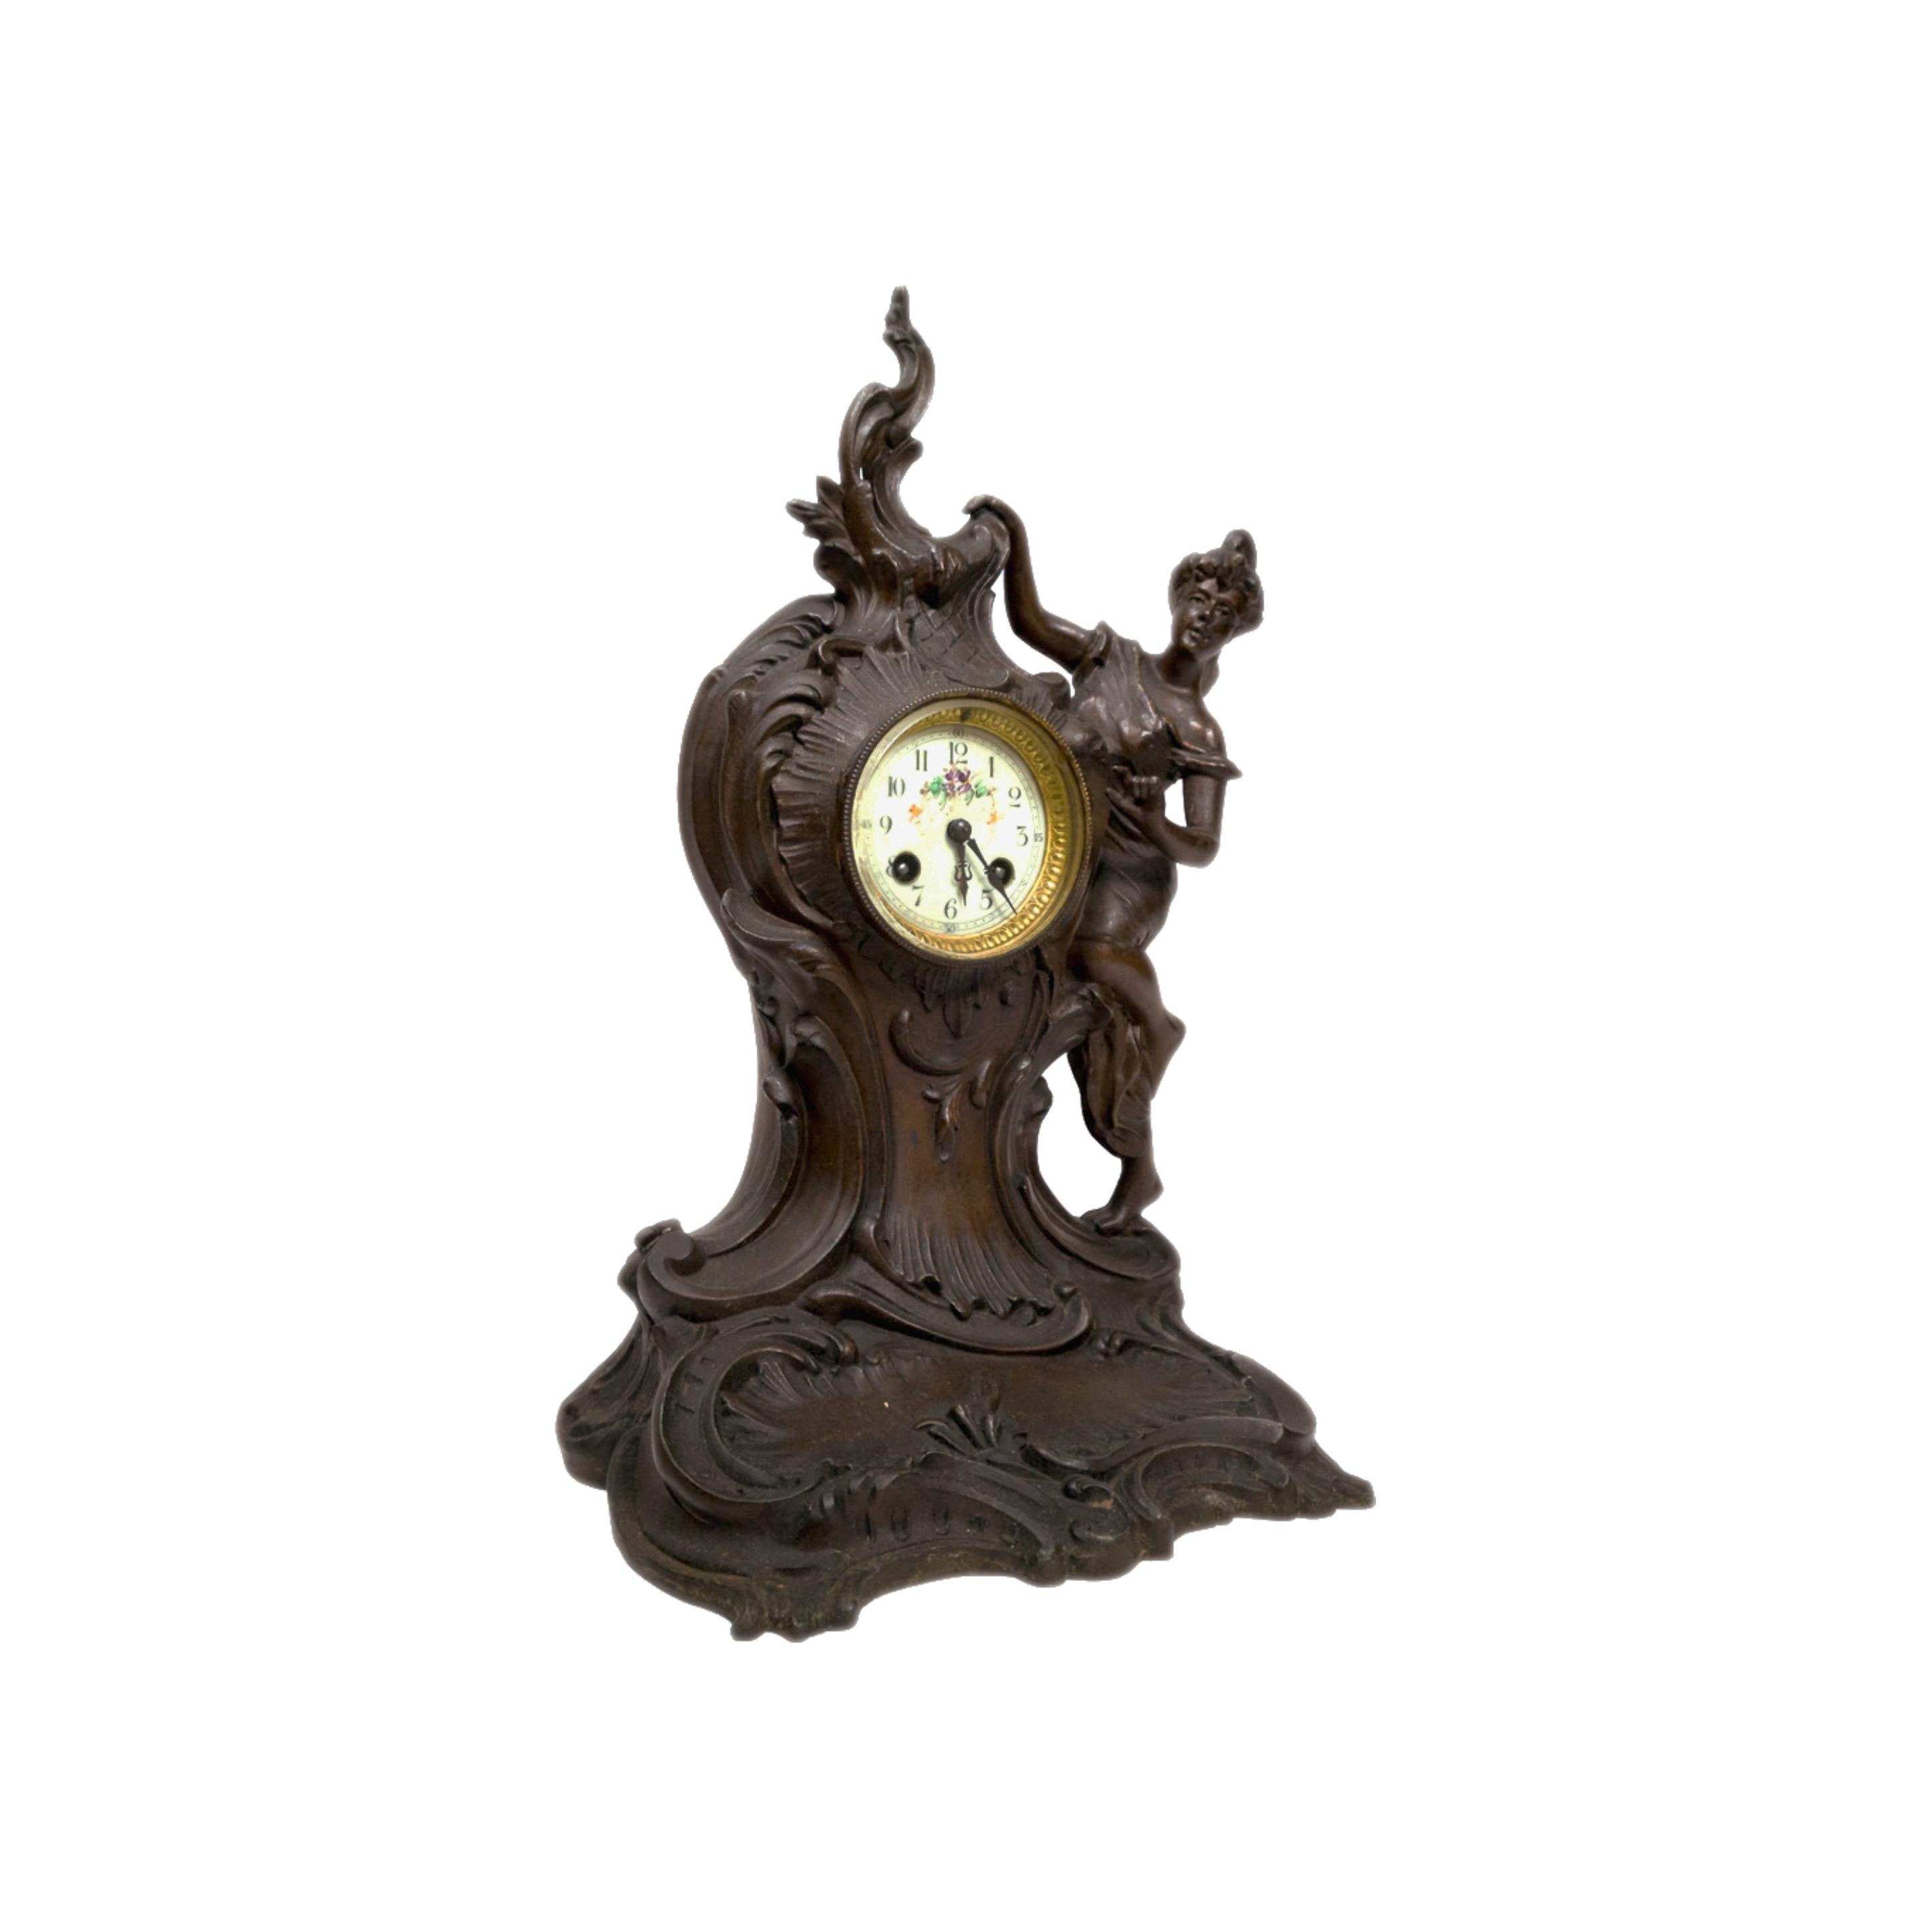 A Napolean III period mantel chimney clock with a mark on the letterhead of the mechanism «horlogerie suisse 23 Rue d'Alsace Lorraine Toulouse» in french Rococo Revival style. Mechanism reviewed recently and in working conditons. 
The emanel golden